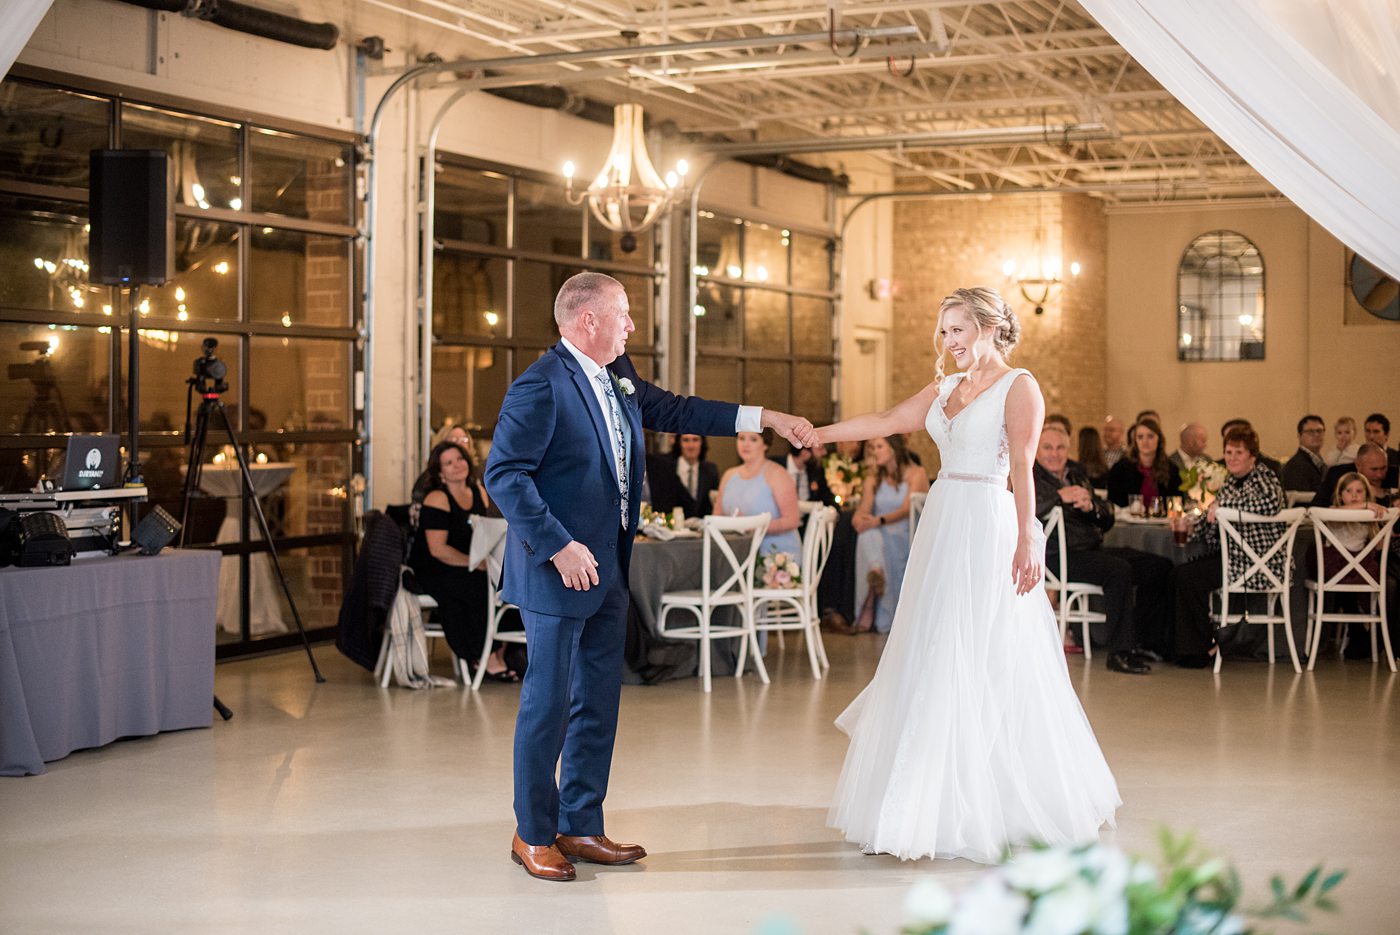 Fall photos at Cary, North Carolina wedding venue Chatham Station by Mikkel Paige Photography. This urban, beautiful space has an indoor and outdoor space near Raleigh. A DJ played as guests looked on during their reception as the bride and father of the bride danced. #mikkelpaige #RaleighWeddingPhotographer #NorthCarolinaWeddings #SouthernWeddings #fallwedding #RaleighWedding #CaryNorthCarolina